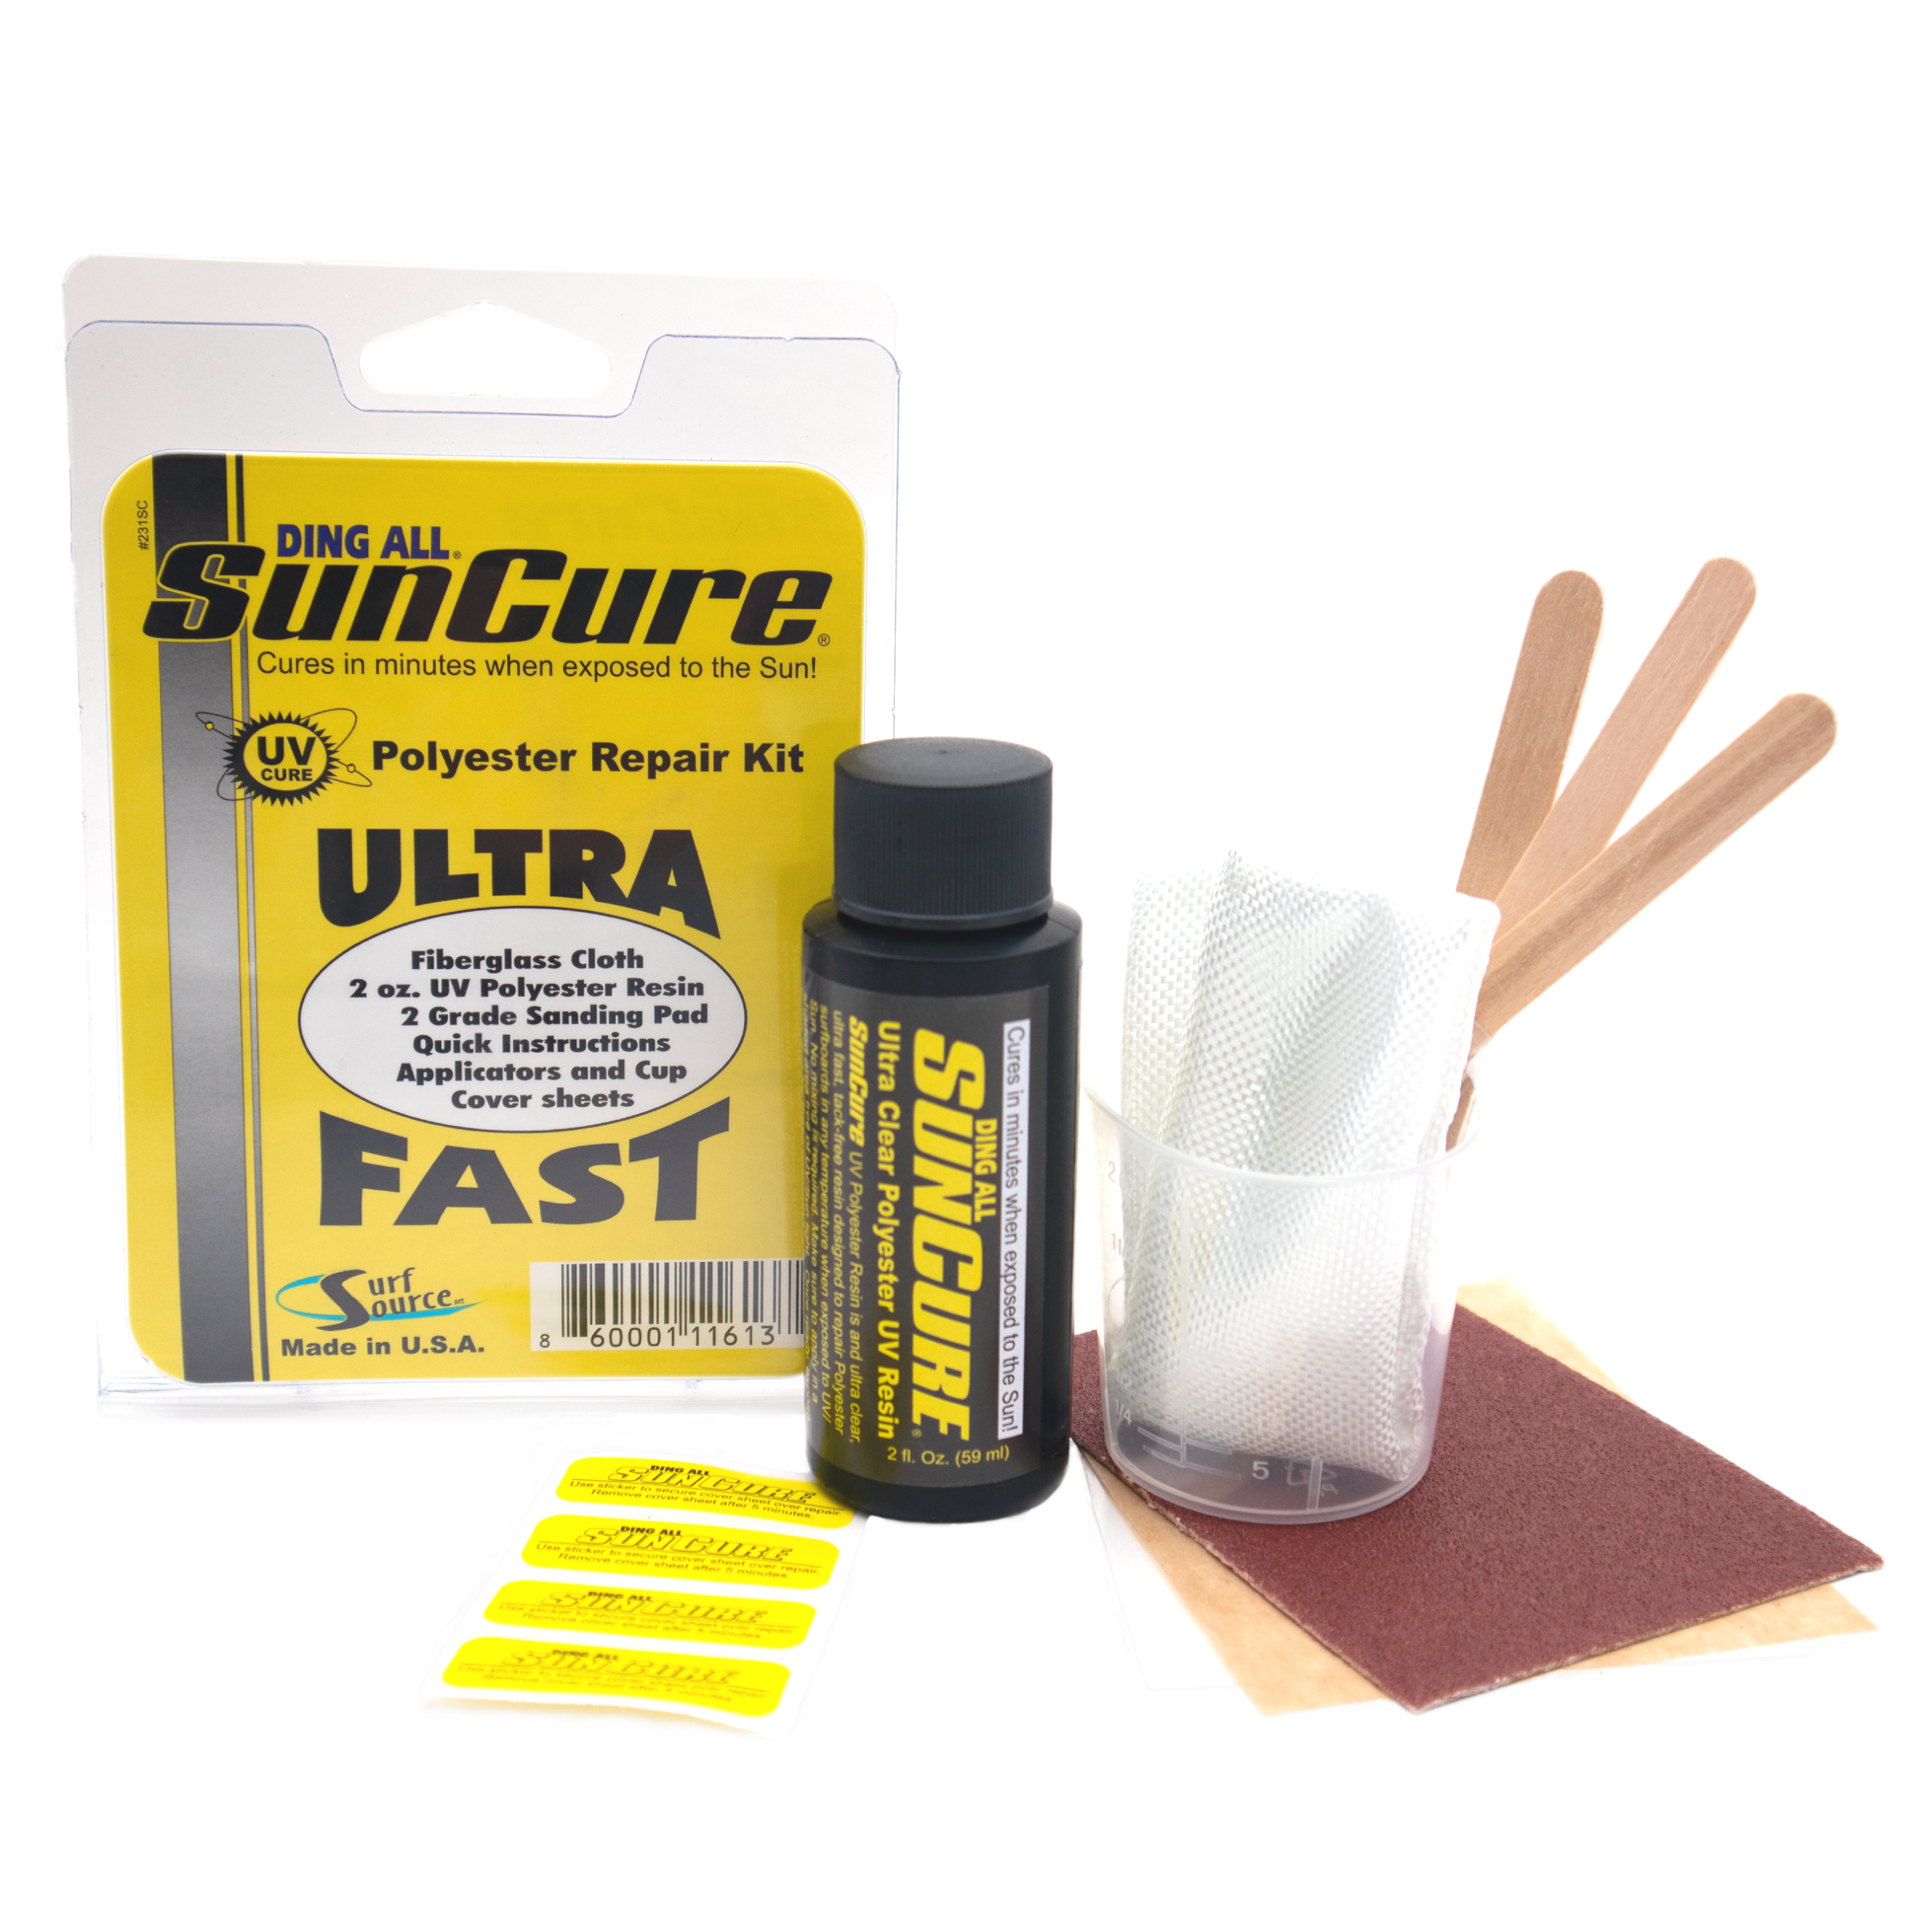 UV Cure Ding Repair Kit With Catalyst